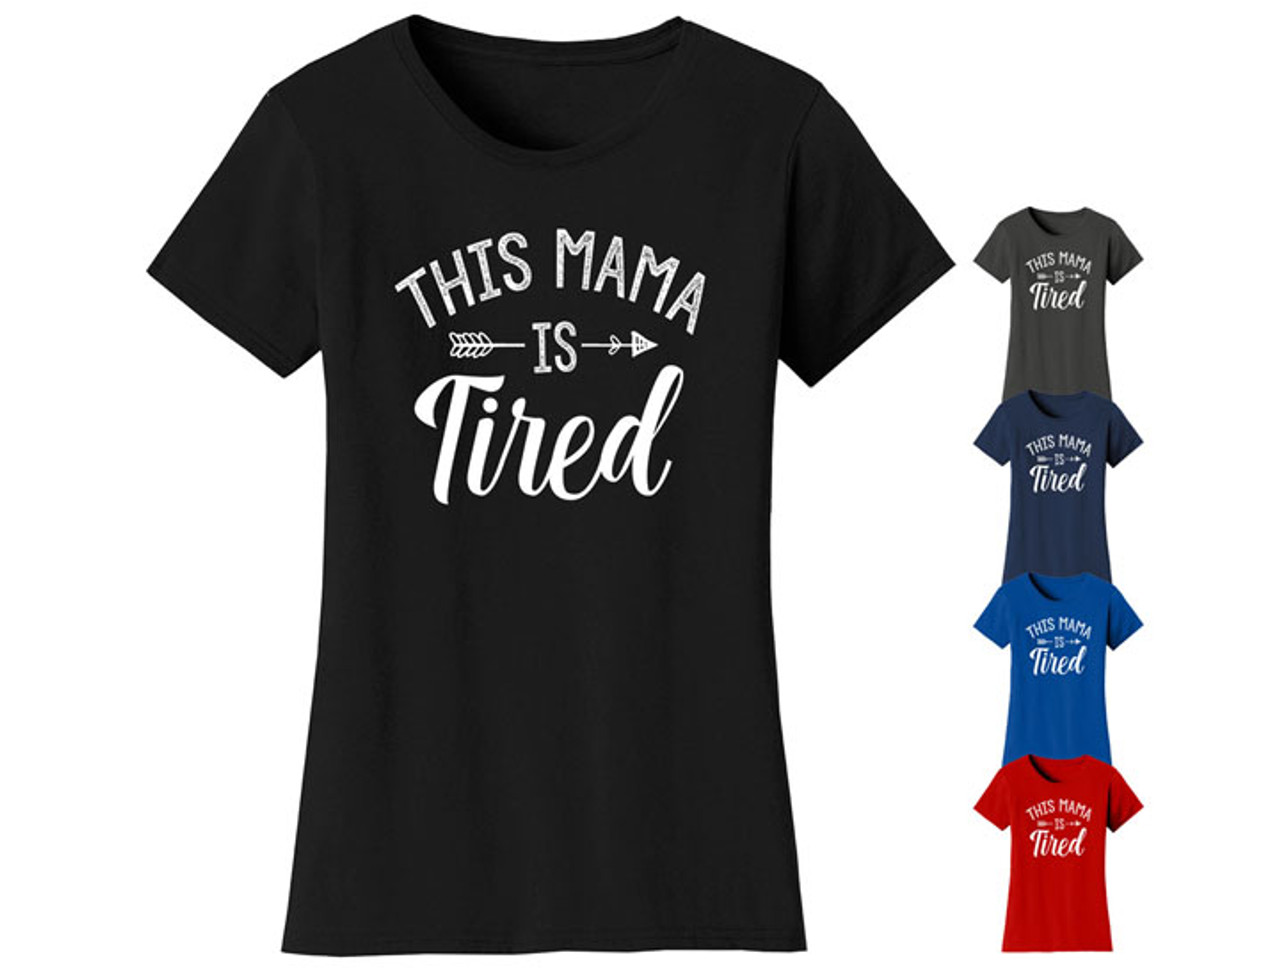 Women's ‘This Mama Is Tired’ T-shirt product image